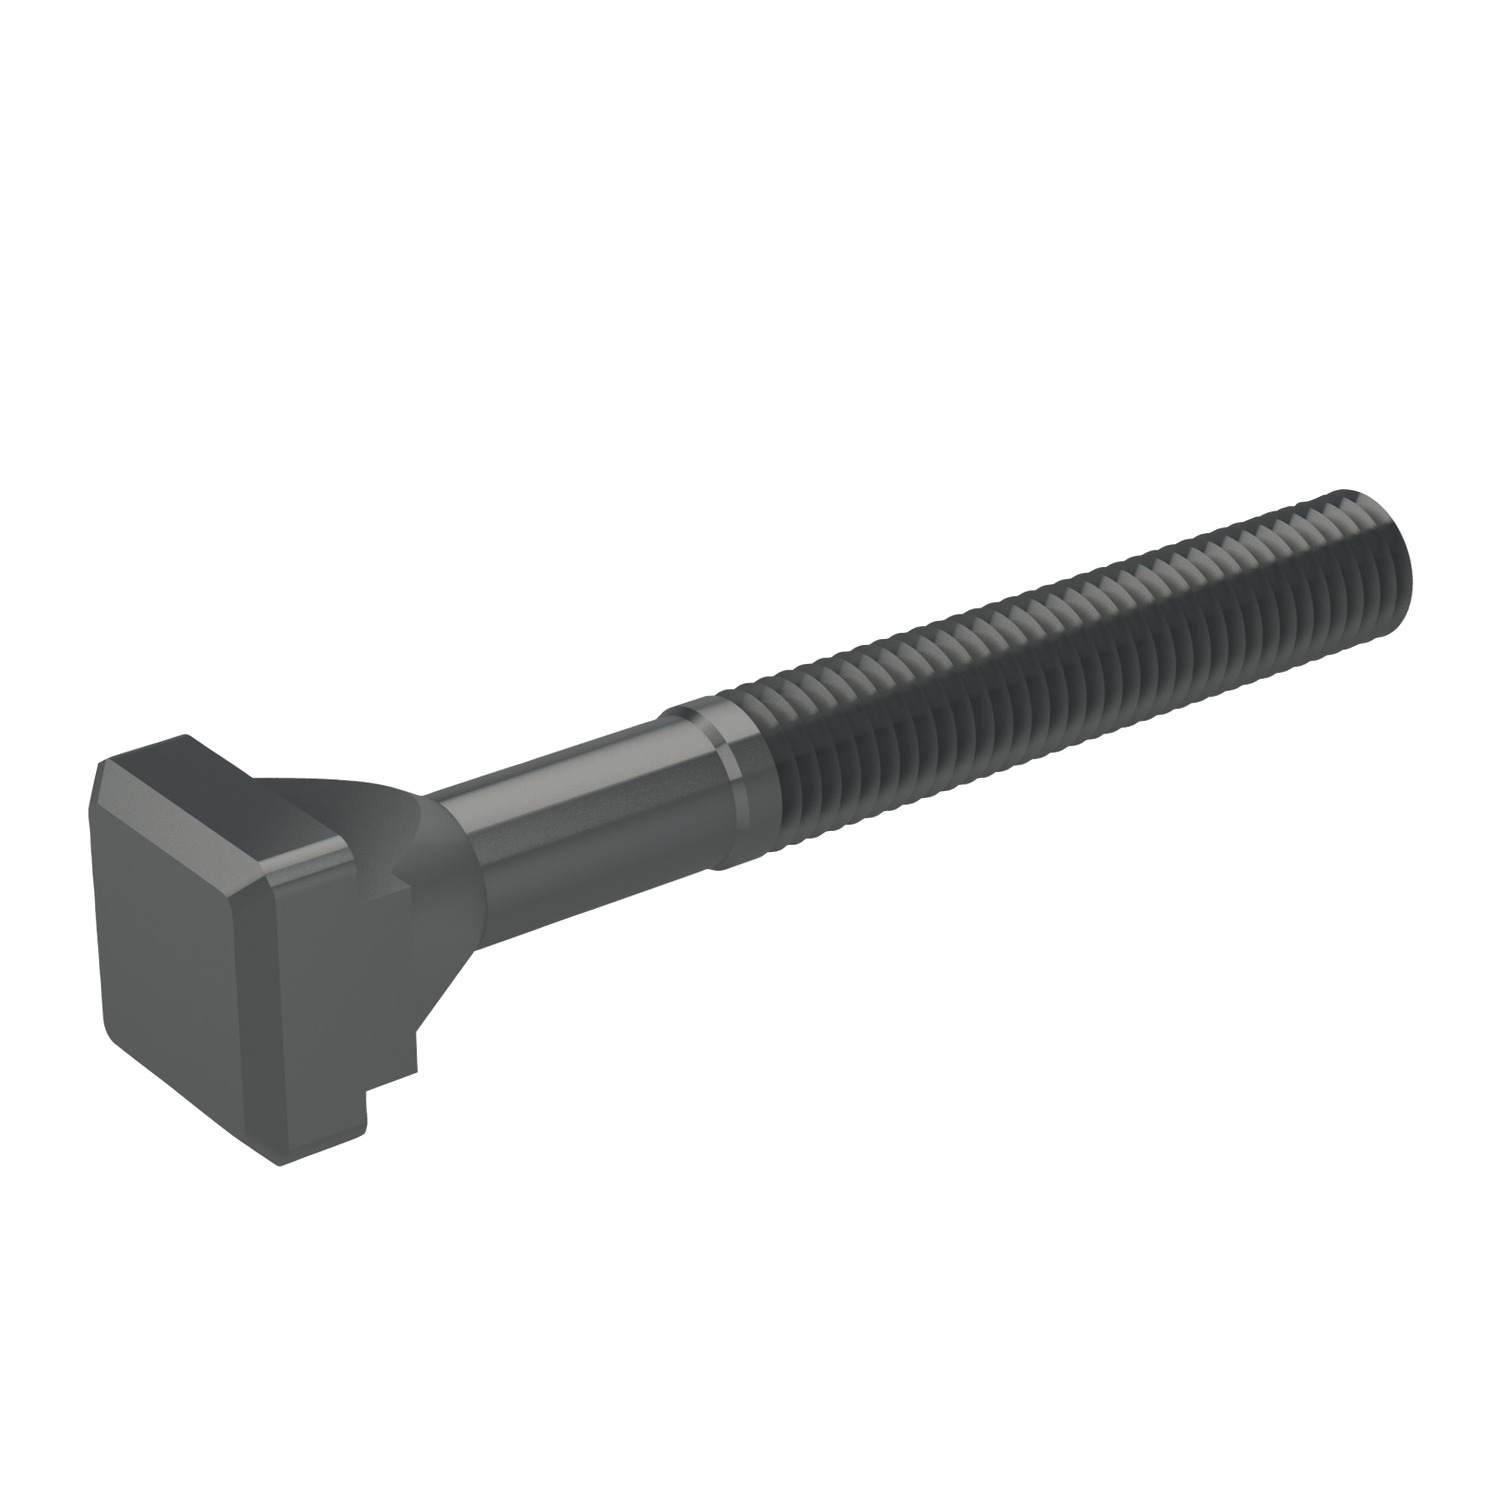 T-Slot Bolts Wixroyd offers two types of t-slot bolts one in strength class 8.8/10 and the extra strength version in 12,9 class